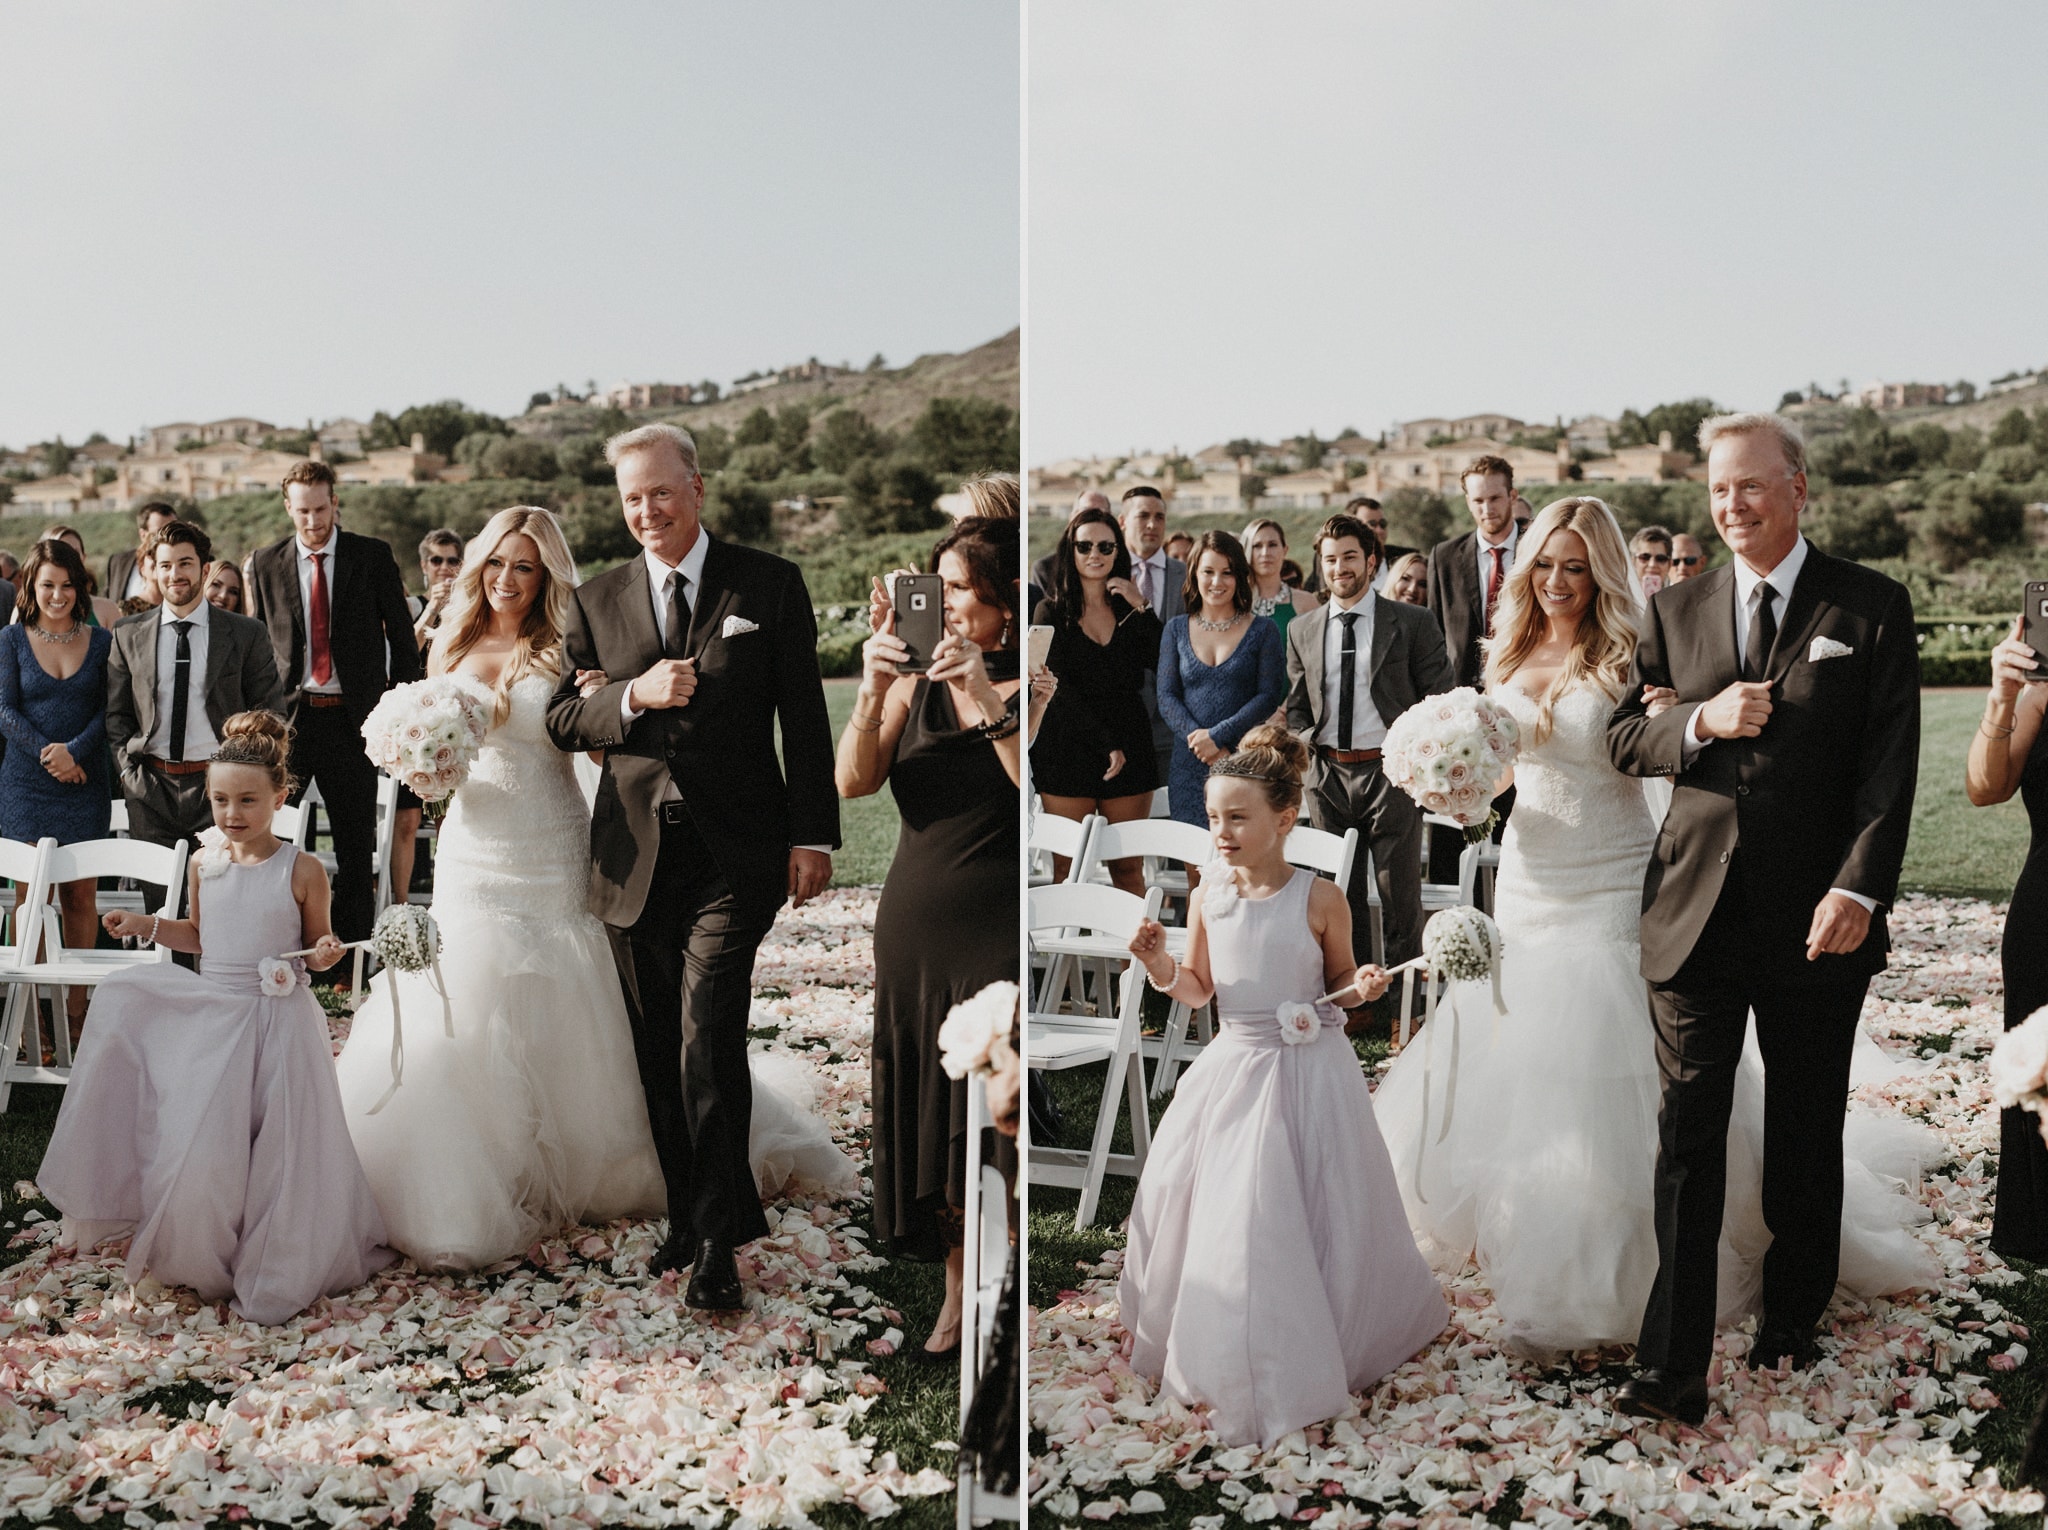 A bride walks down the aisle with her father at a beautiful outdoor wedding ceremony at the Pelican Hill Resort in Orange County.